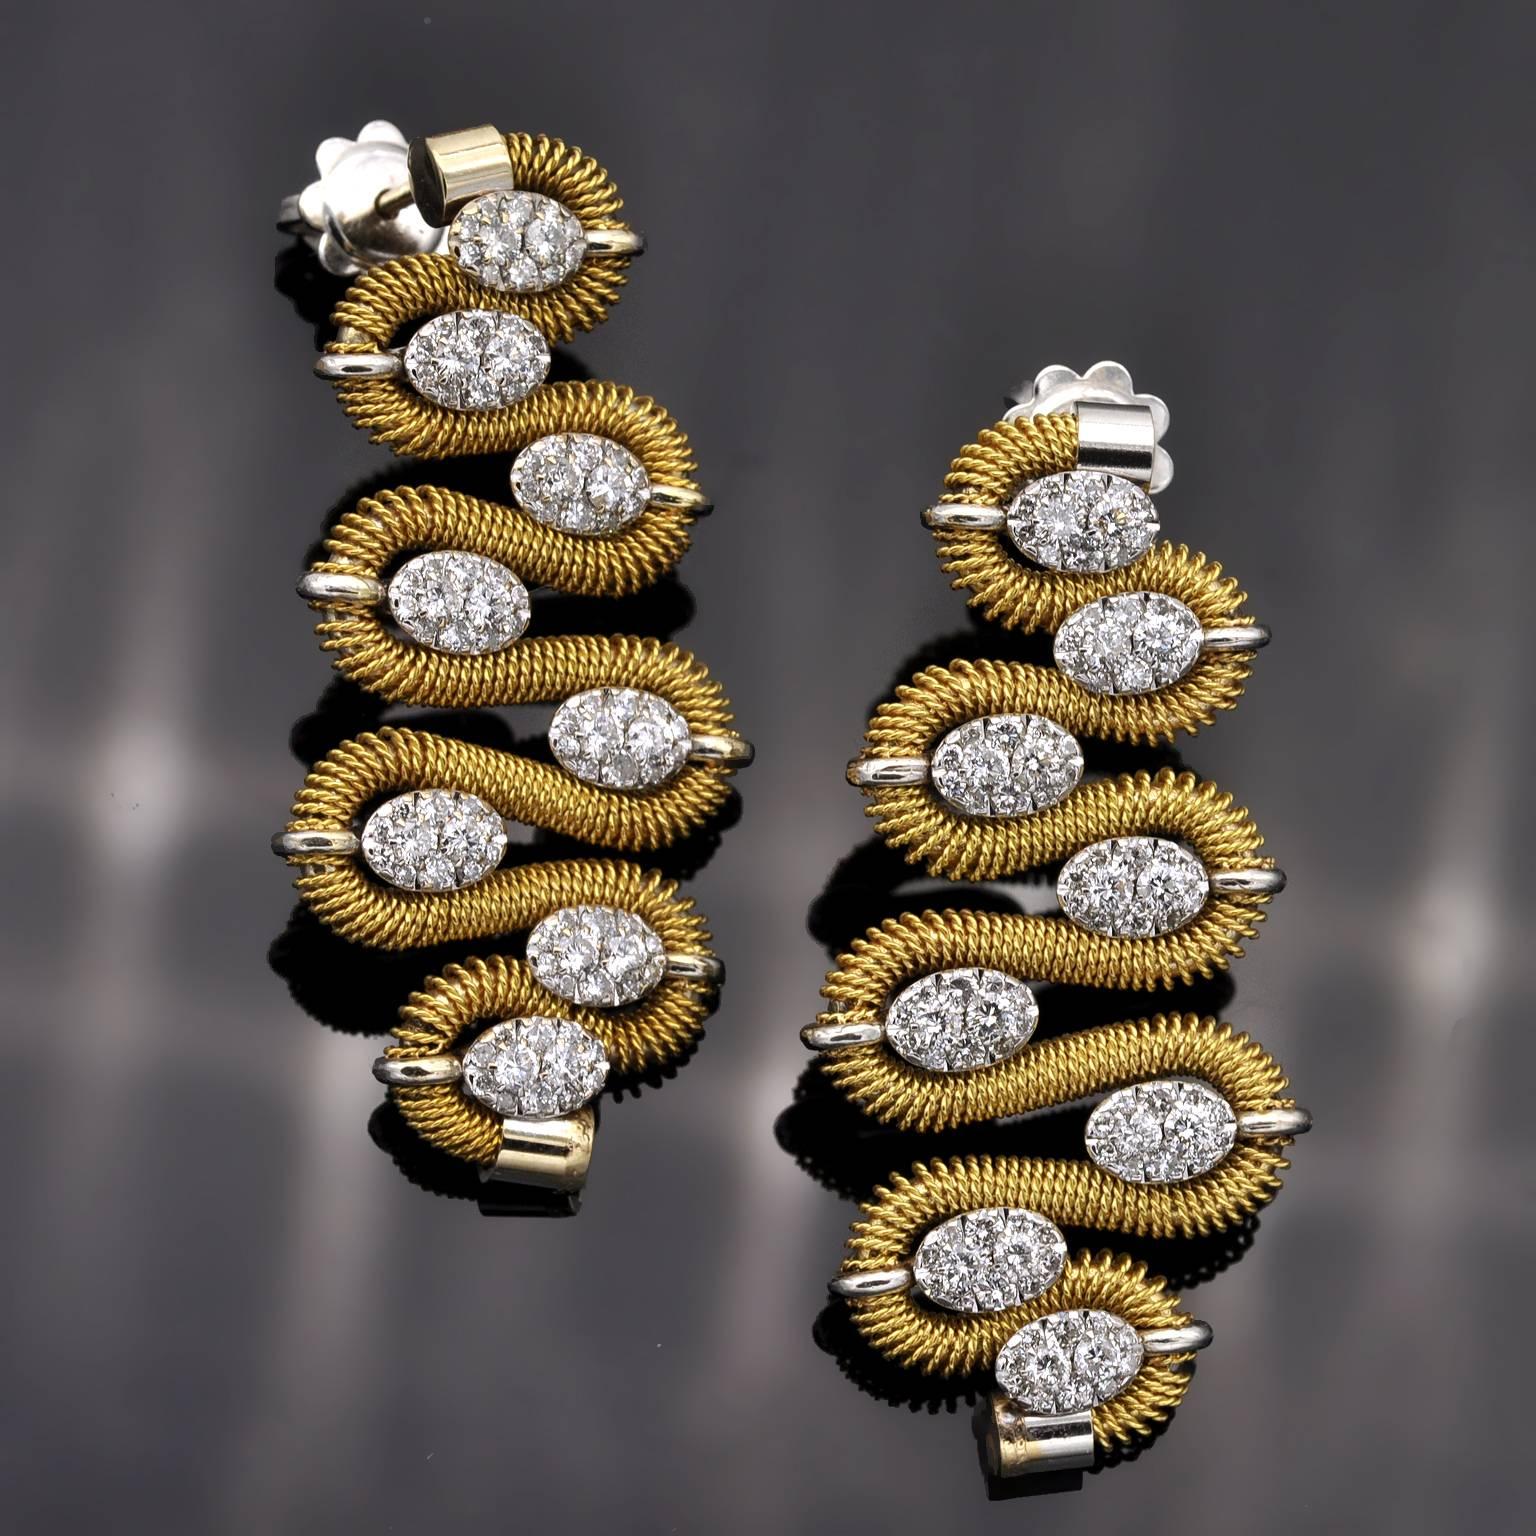 Exquisite 18KT gold Earrings, Entirely hand crafted by Marchisio, italian jewellers  since1859. . 
Diamonds: 2.27 carats 
Gold : 13.2 gr

Matches Necklace Ref: LU47232577983
And Bracelet Ref: LU47232577993
